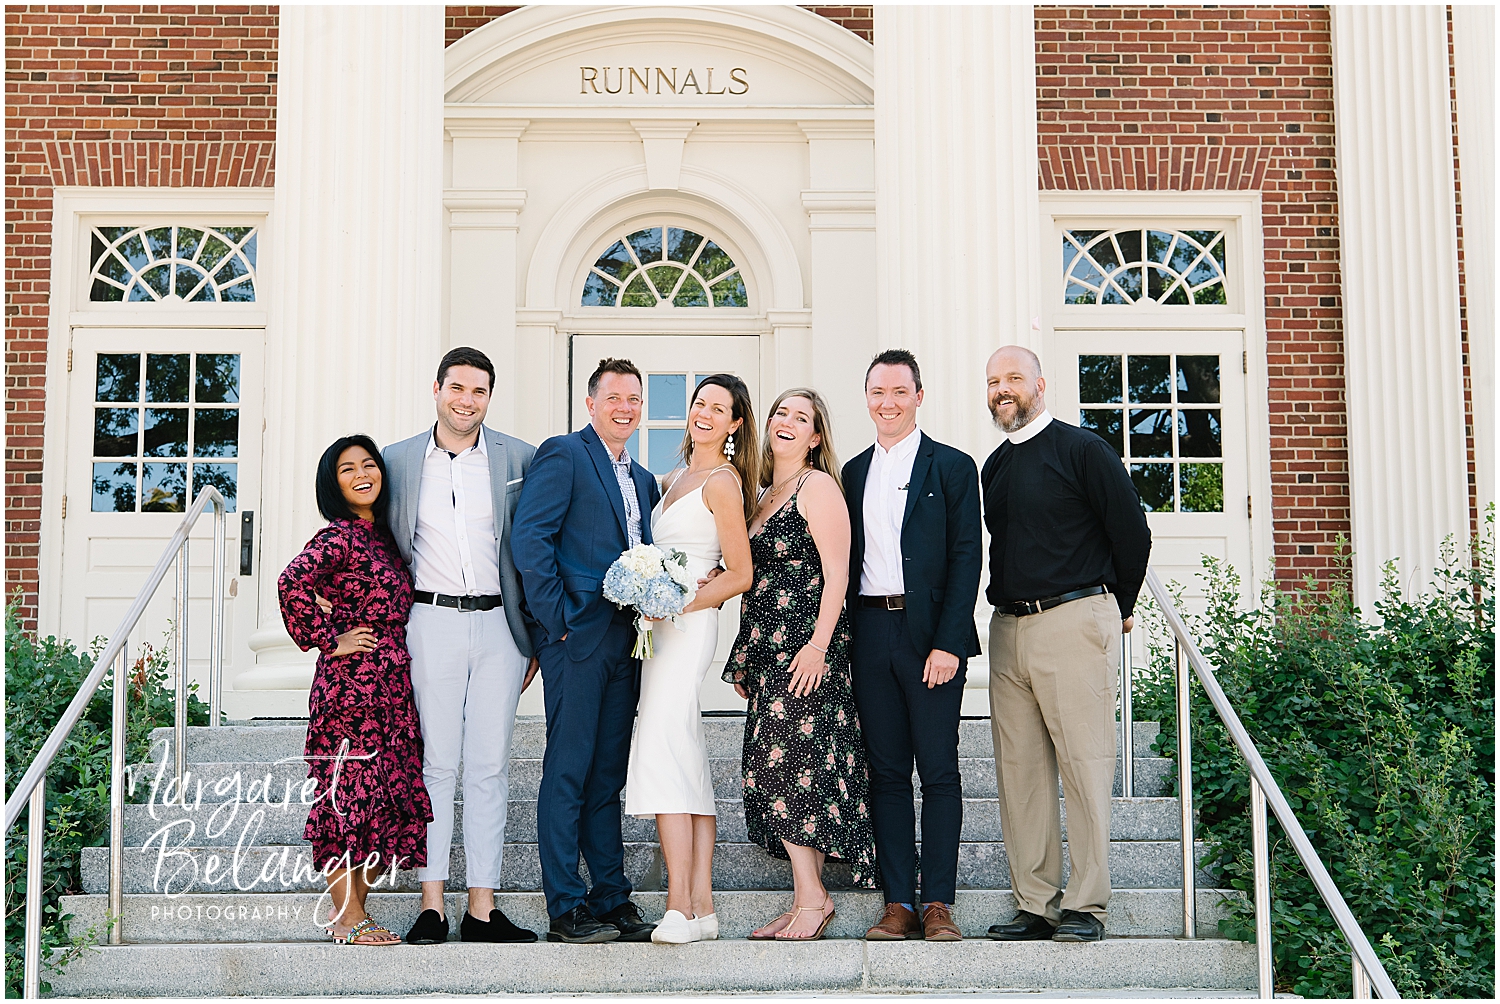 A group of well-dressed individuals smiling and posing together on the steps of a building with the word "Runnals" engraved above the entrance.